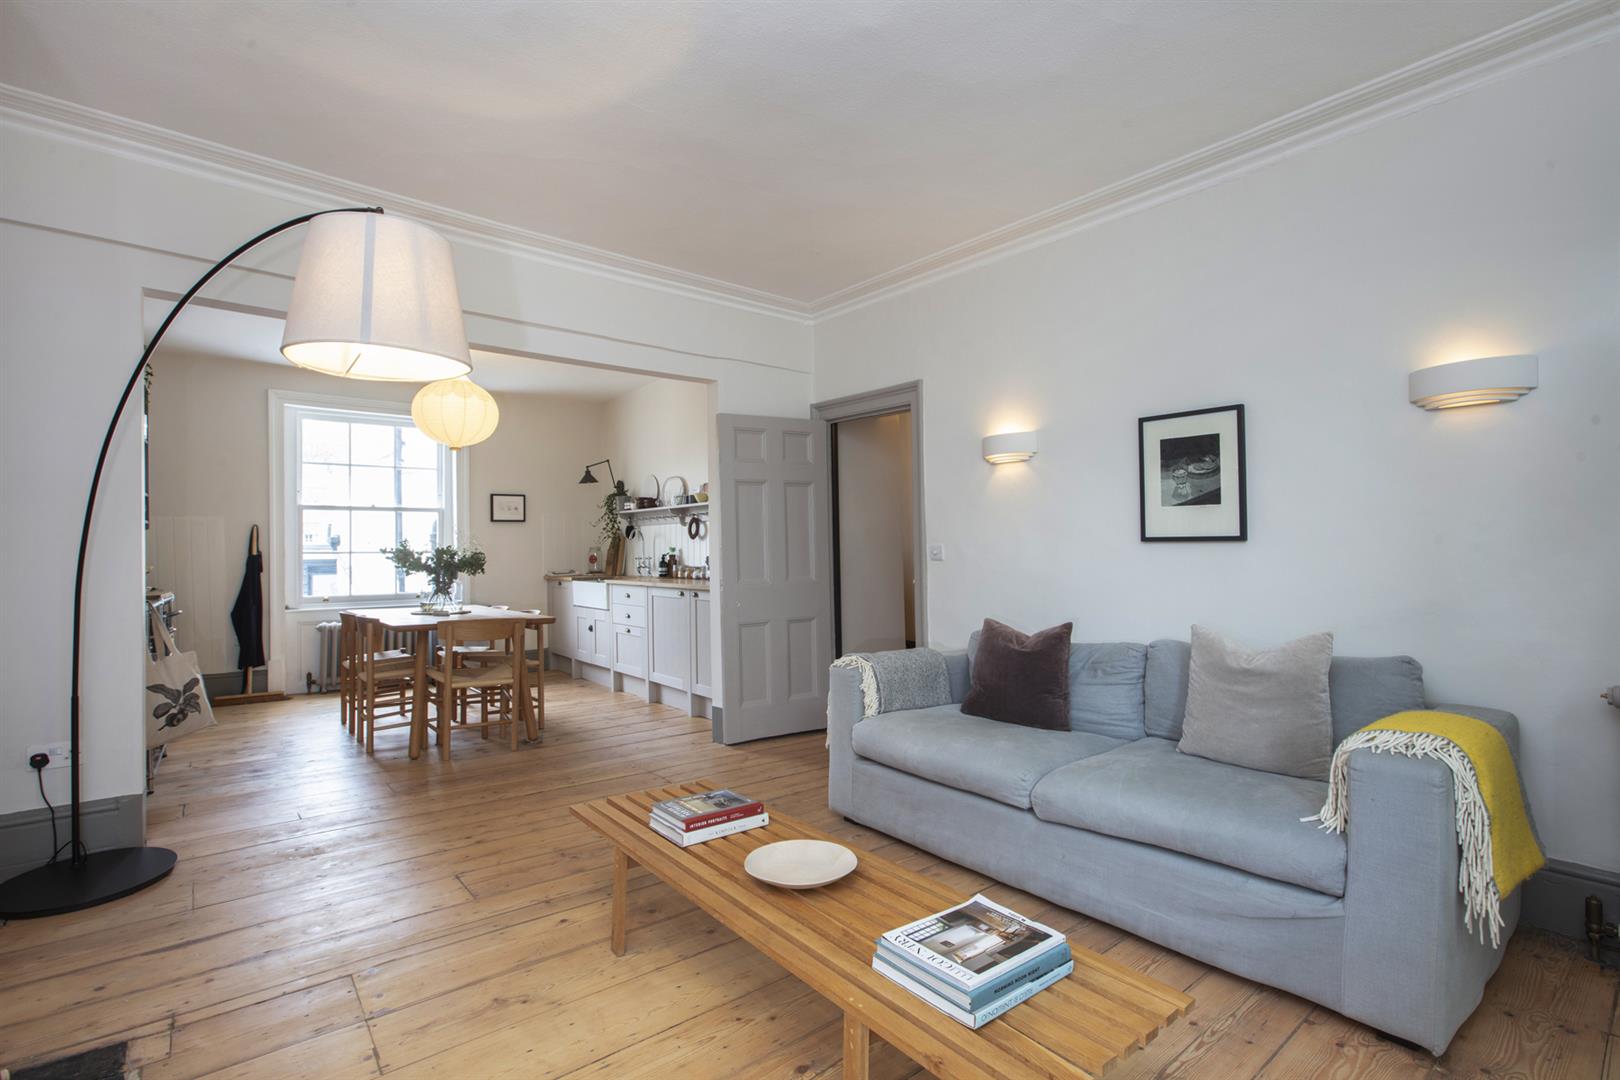 Flat - Conversion For Sale in Grove Lane, Camberwell, SE5 944 view5